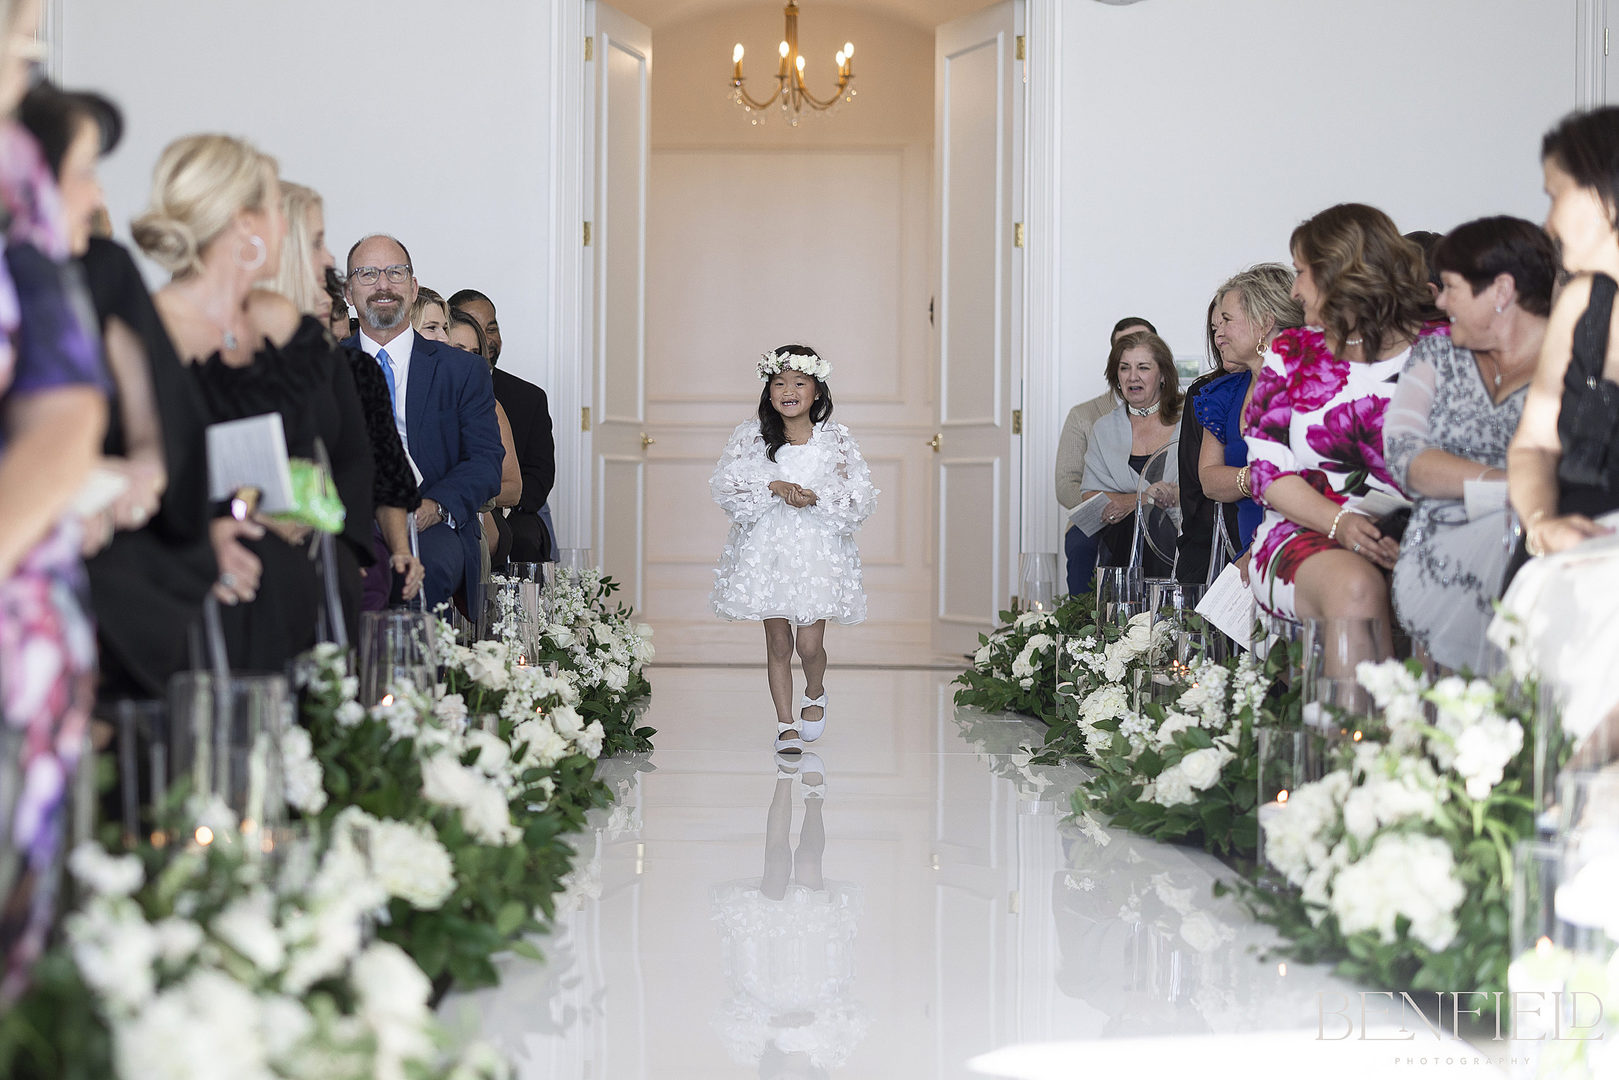 Beautiful flower girl walks down the aisle in preparation for the bride's entrance to her wedding ceremony at Hillside Estate